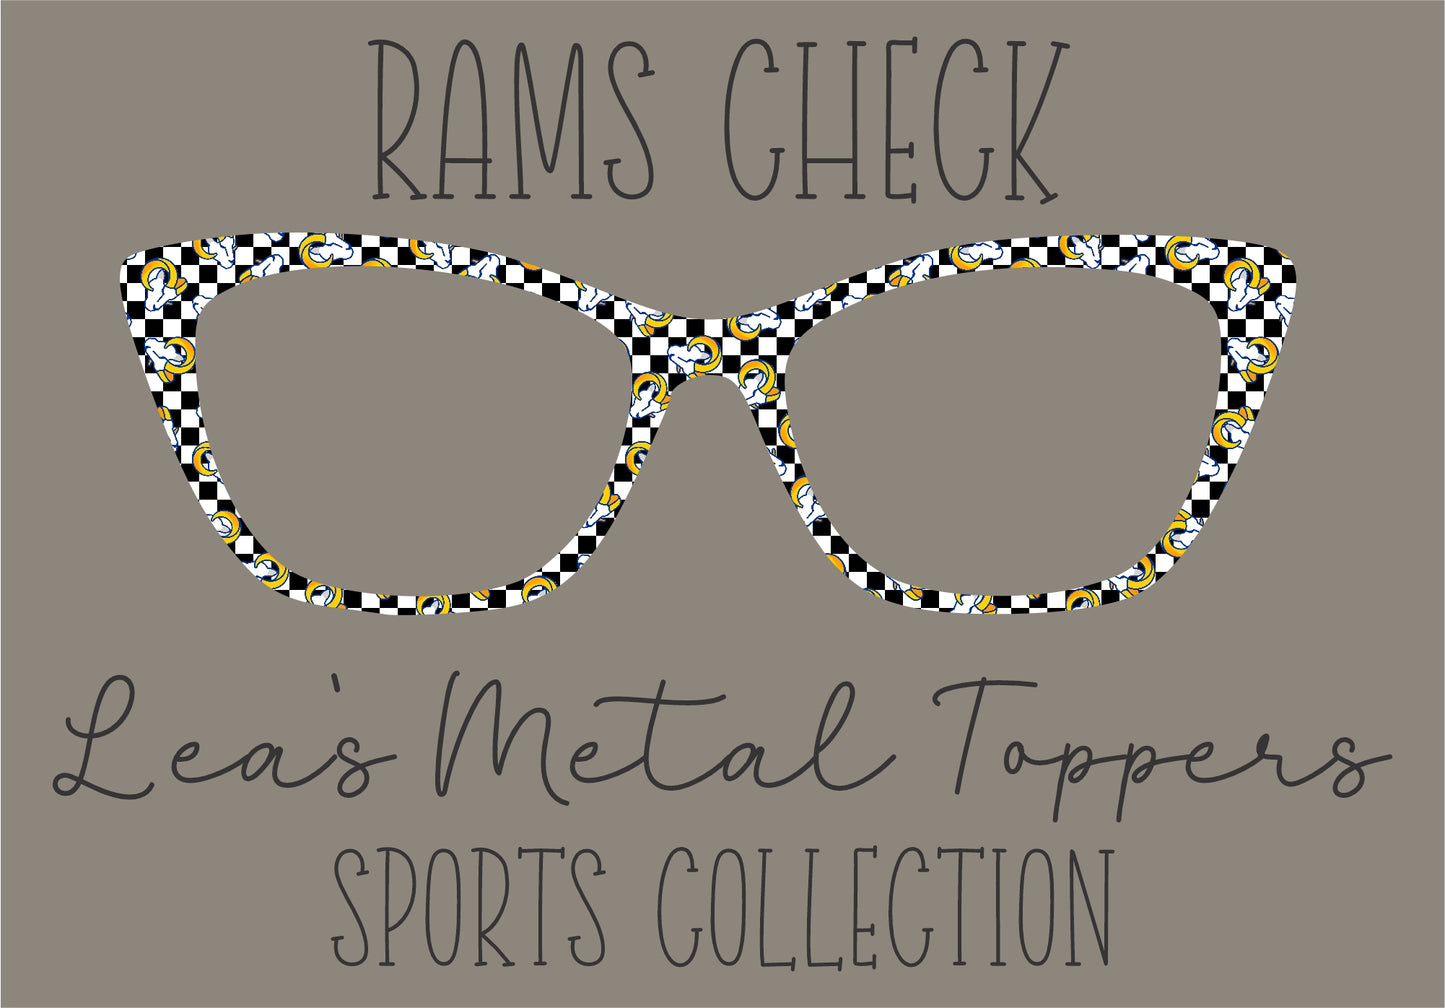 RAMS CHECK Eyewear Frame Toppers COMES WITH MAGNETS